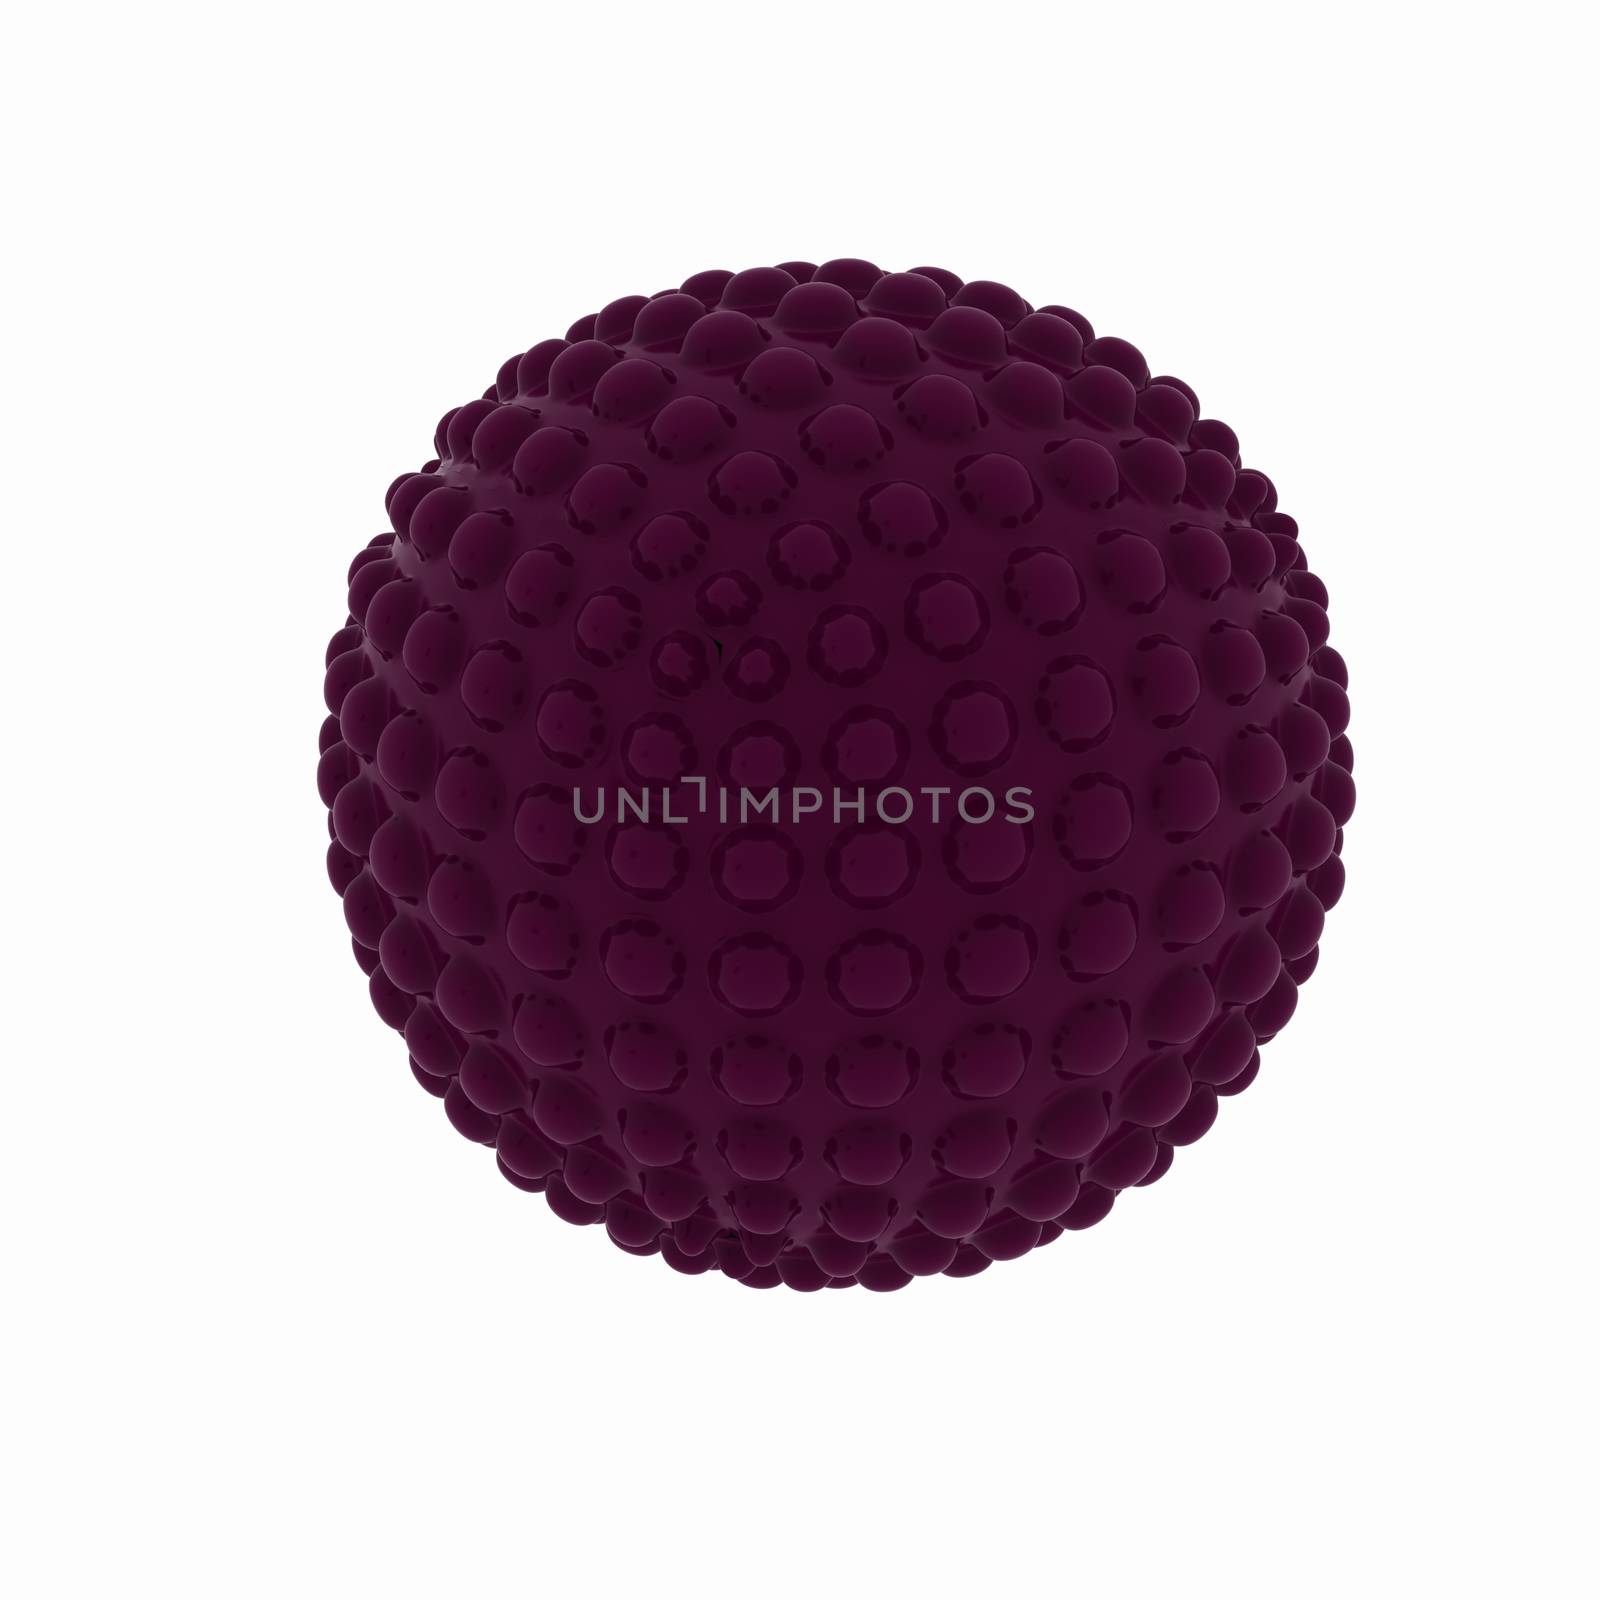 Abstract glossy sphere with pimples on a white background